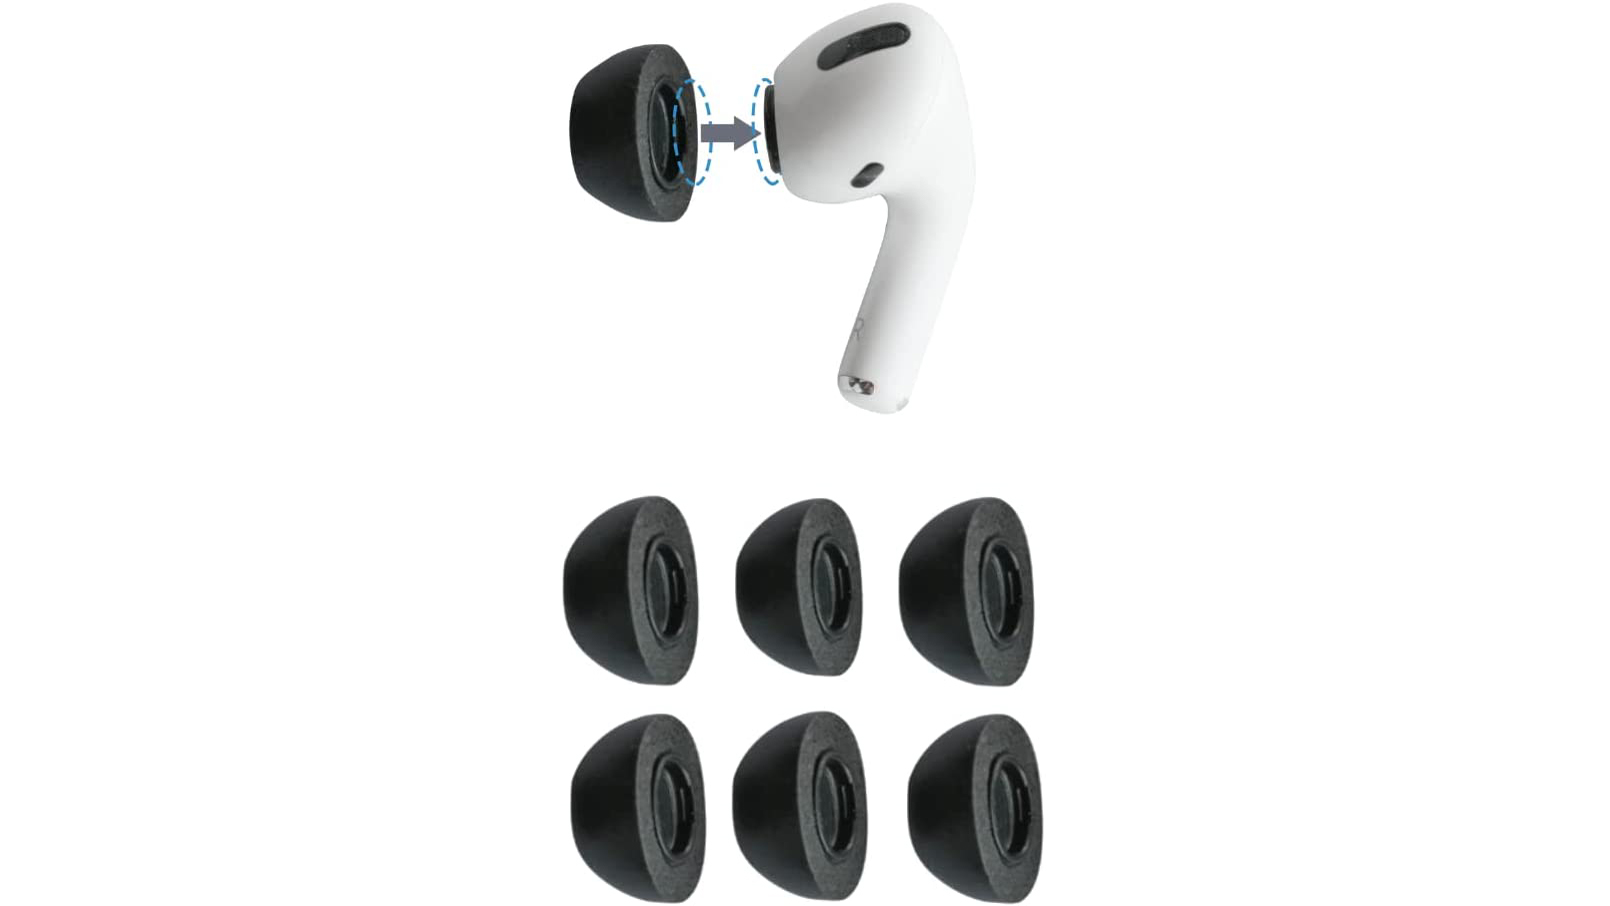 A manufacturer photo of the Comply memory foam tips for AirPods Pro.